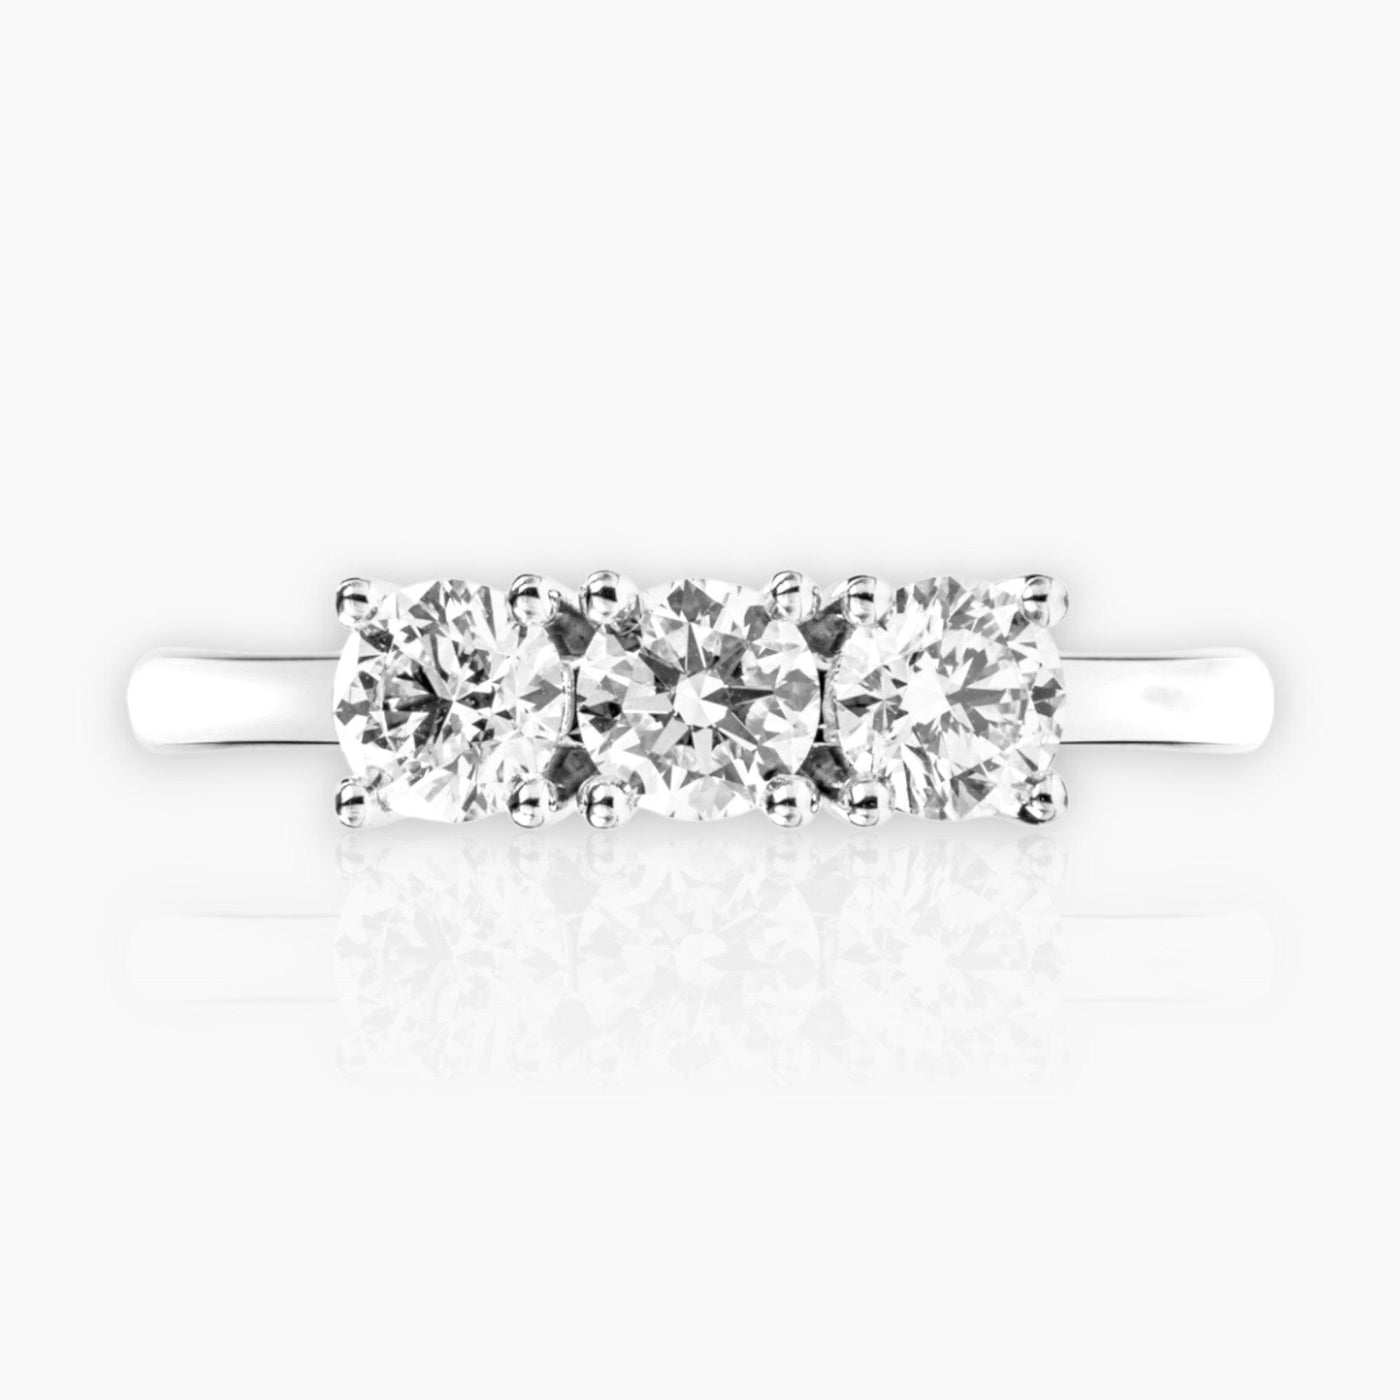 TRILOGY 9 - Riviera Engagement Ring - Moregola Fine Jewelry